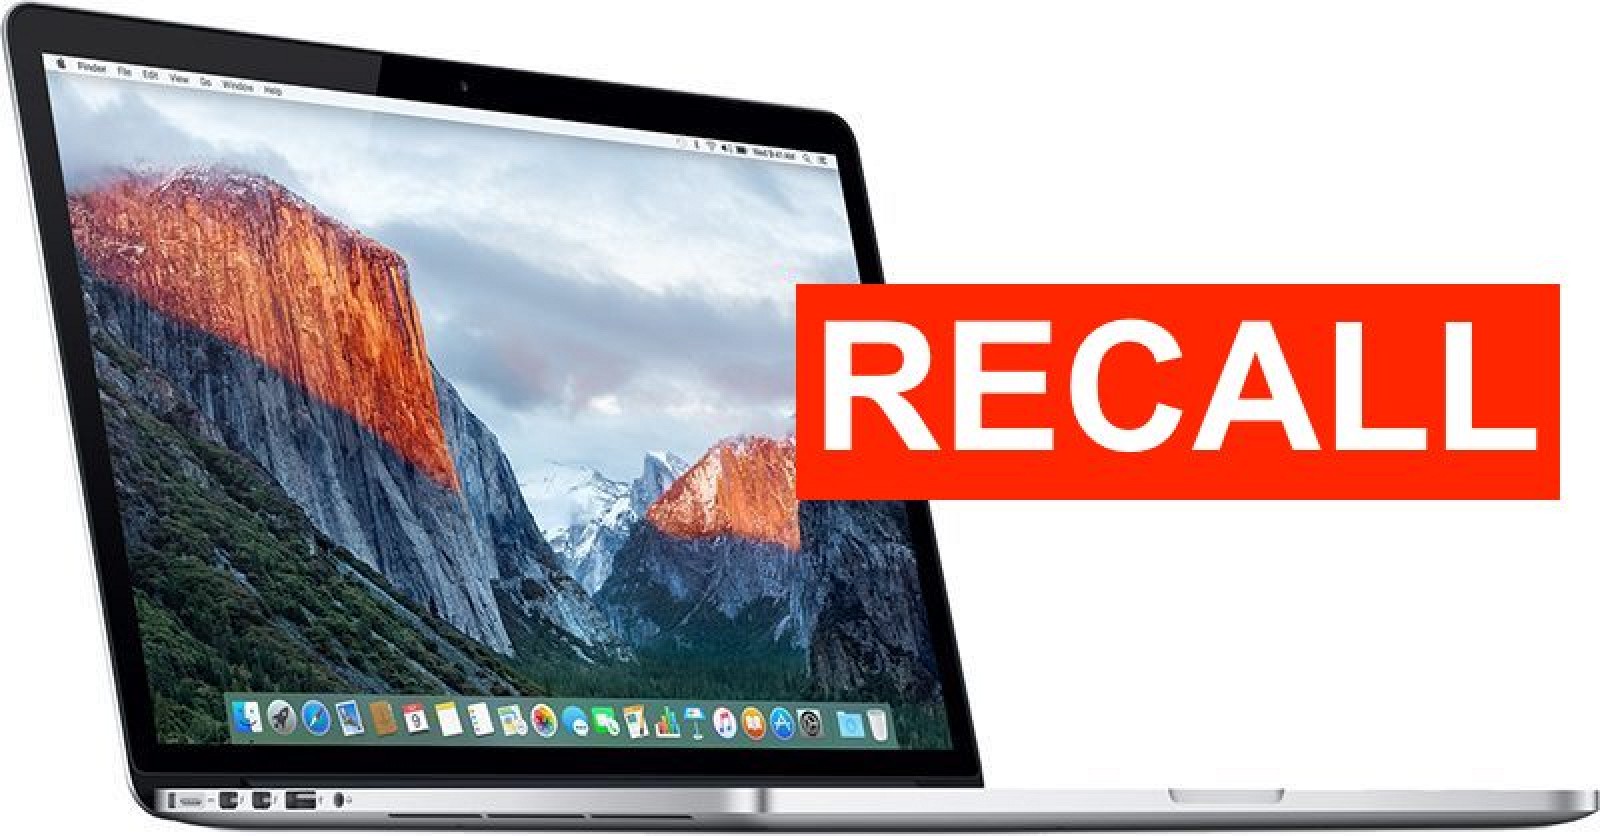 2015 15" MacBook Pro Recall Applies to About 432,000 Units, Apple Received 26 Reports of Batteries Overheating